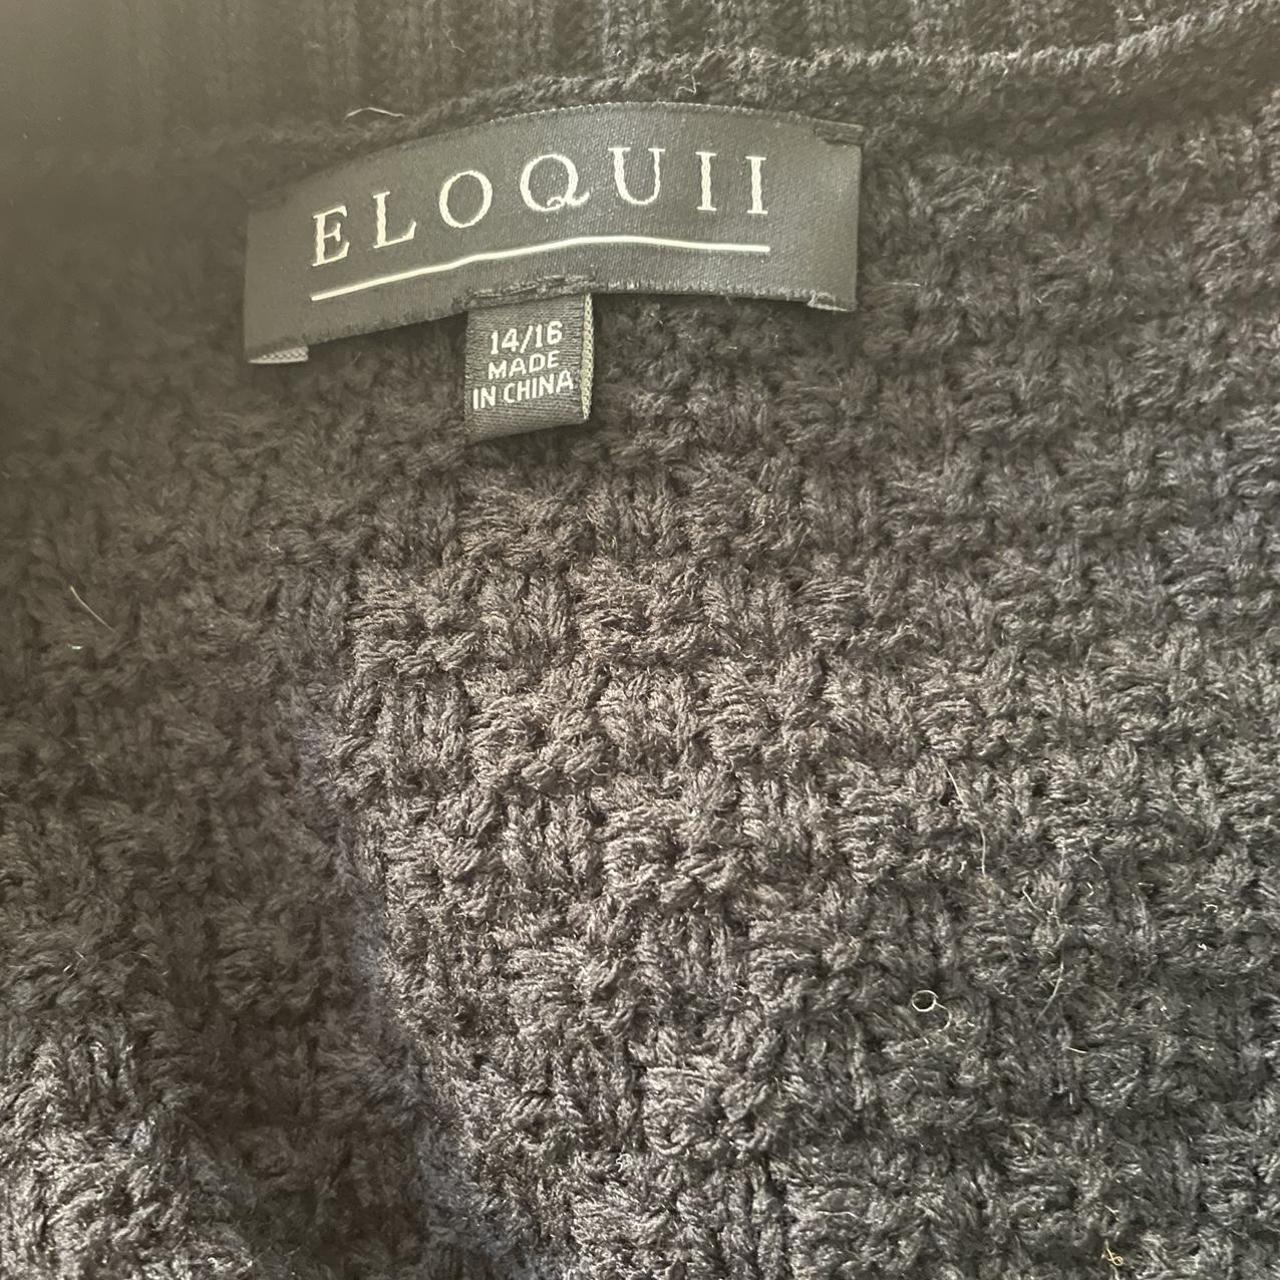 Product Image 4 - Long length sweater vest
ELOQUII brand
Size